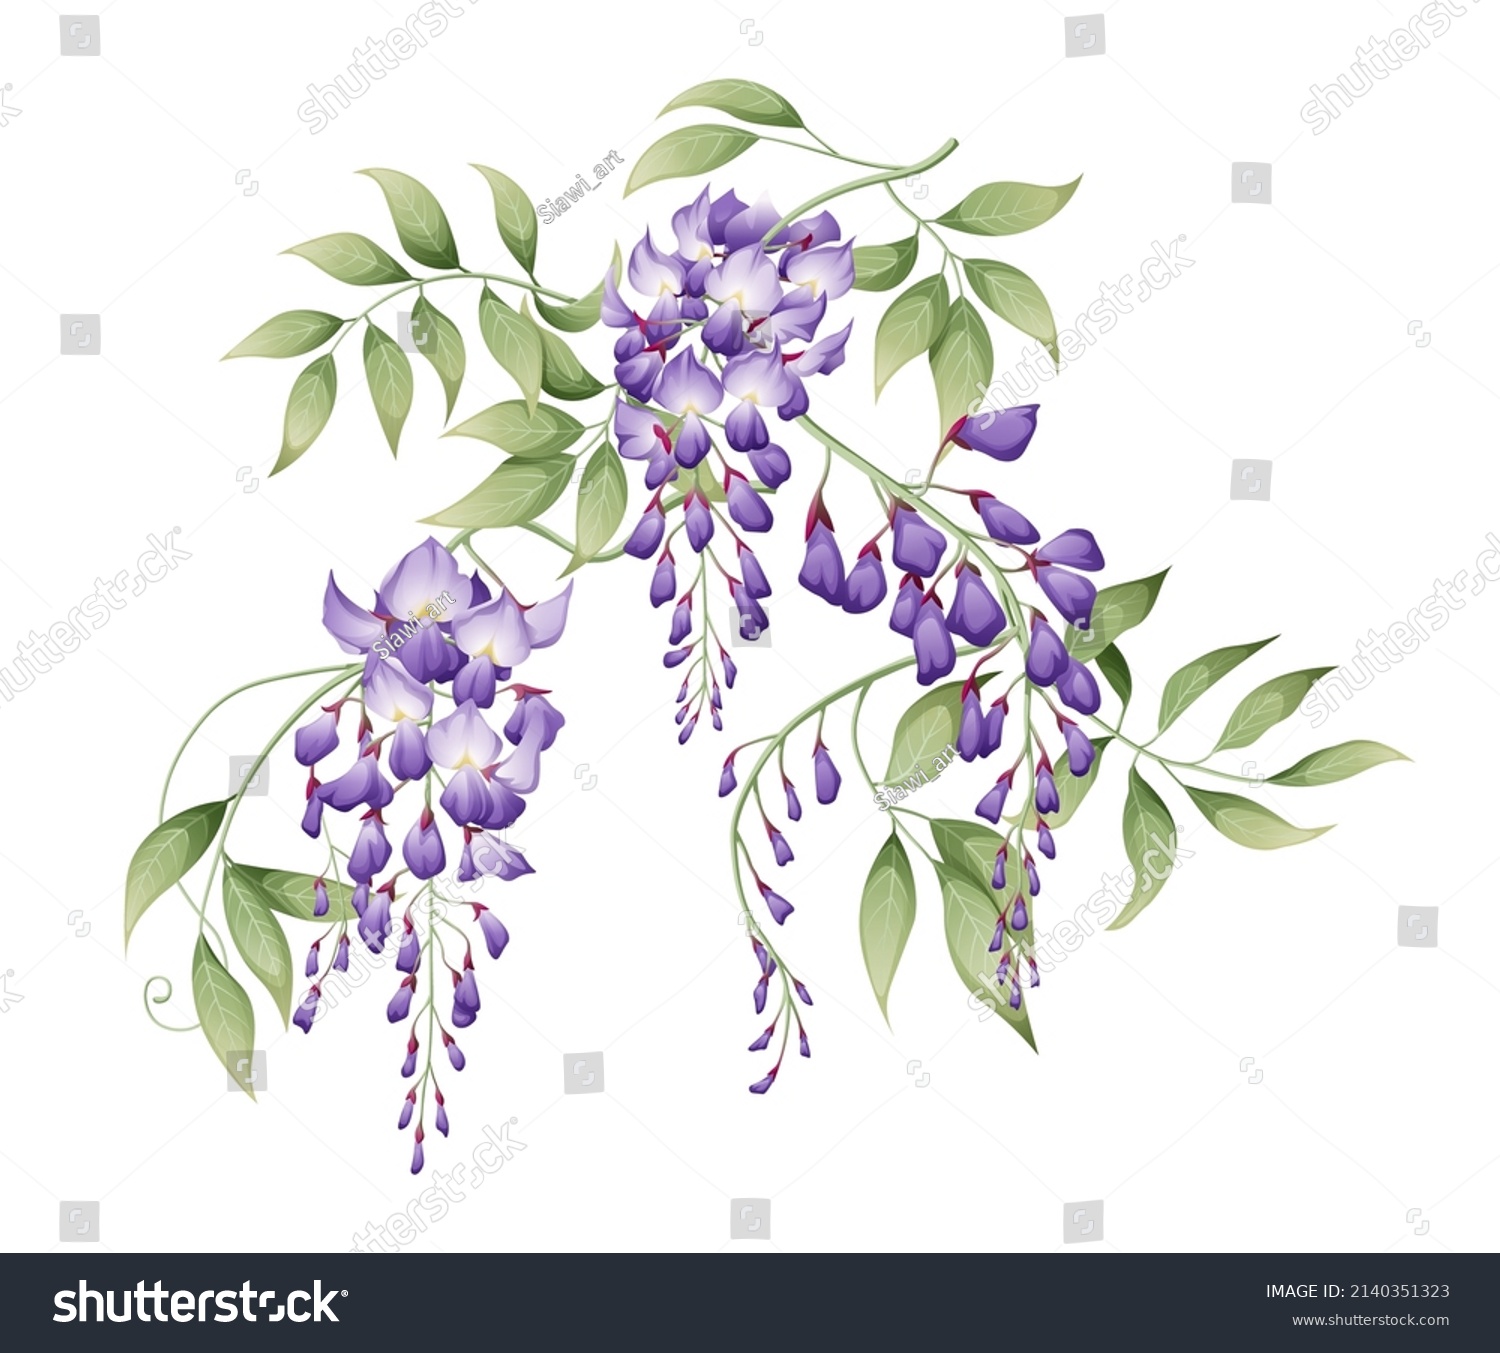 SVG of Vector illustration of a branch of wisteria with green leaves. Great for decorating cards, invitations, etc. svg